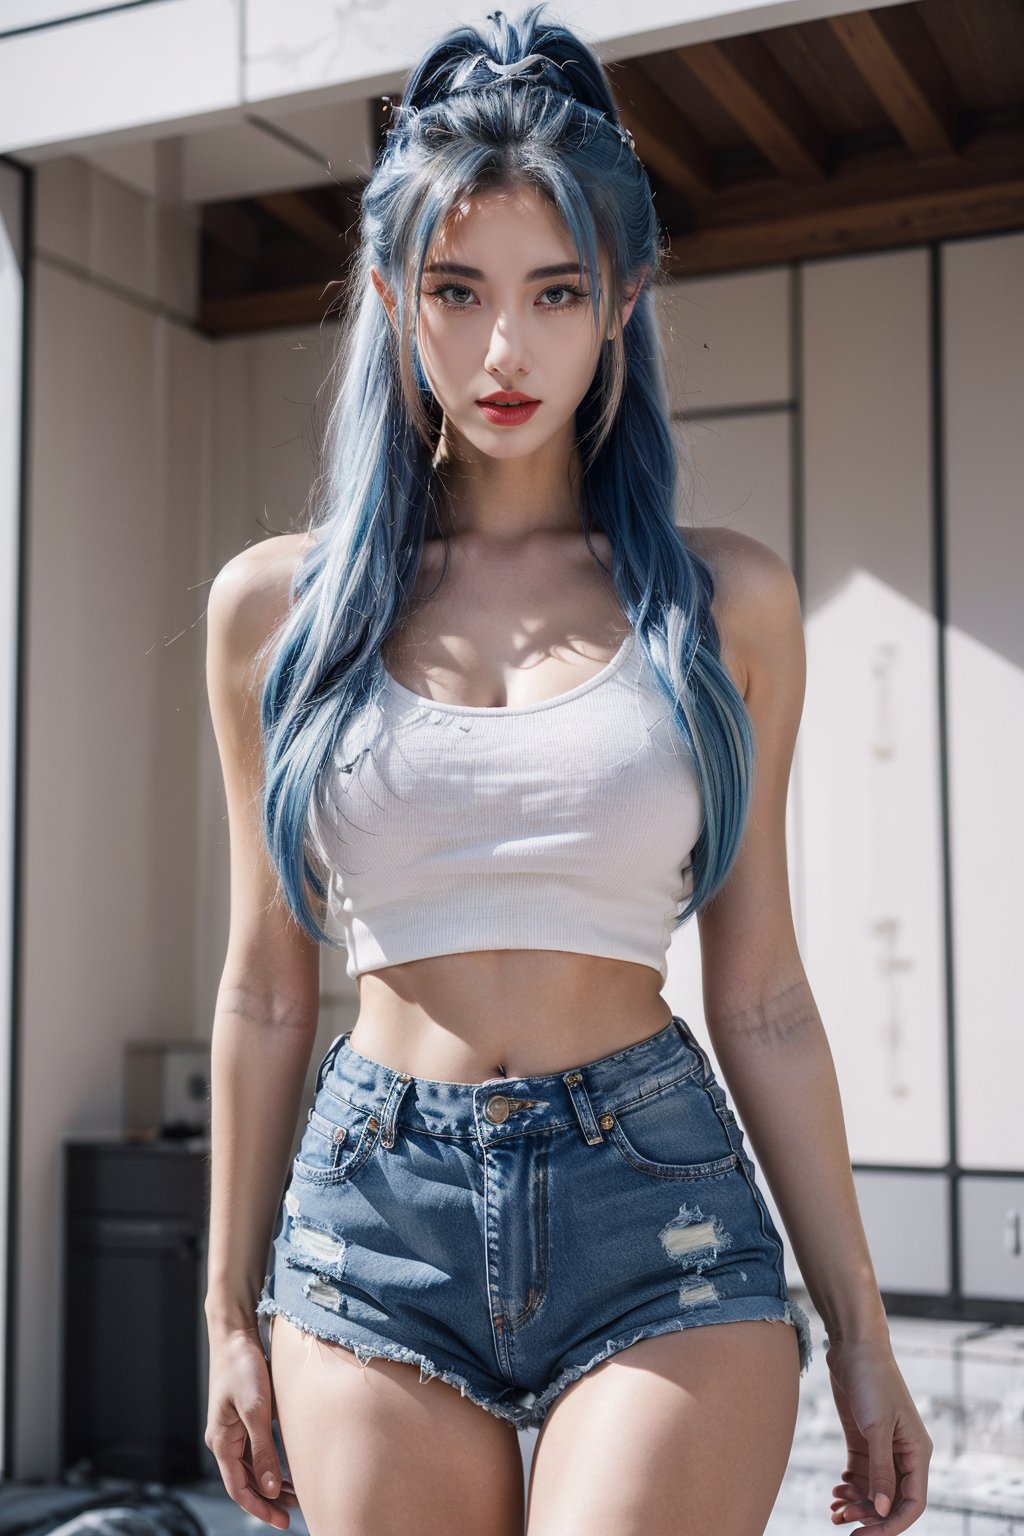  21yo girl, solo, looking at viewer, blue|white hair, high ponytail,
Pantyhose, Ripped denim shorts, 

wide shot, 
HDR, Vibrant colors, surreal photography, highly detailed, masterpiece, ultra high res,
high contrast, mysterious, cinematic, fantasy, bright natural light, , pantyhose